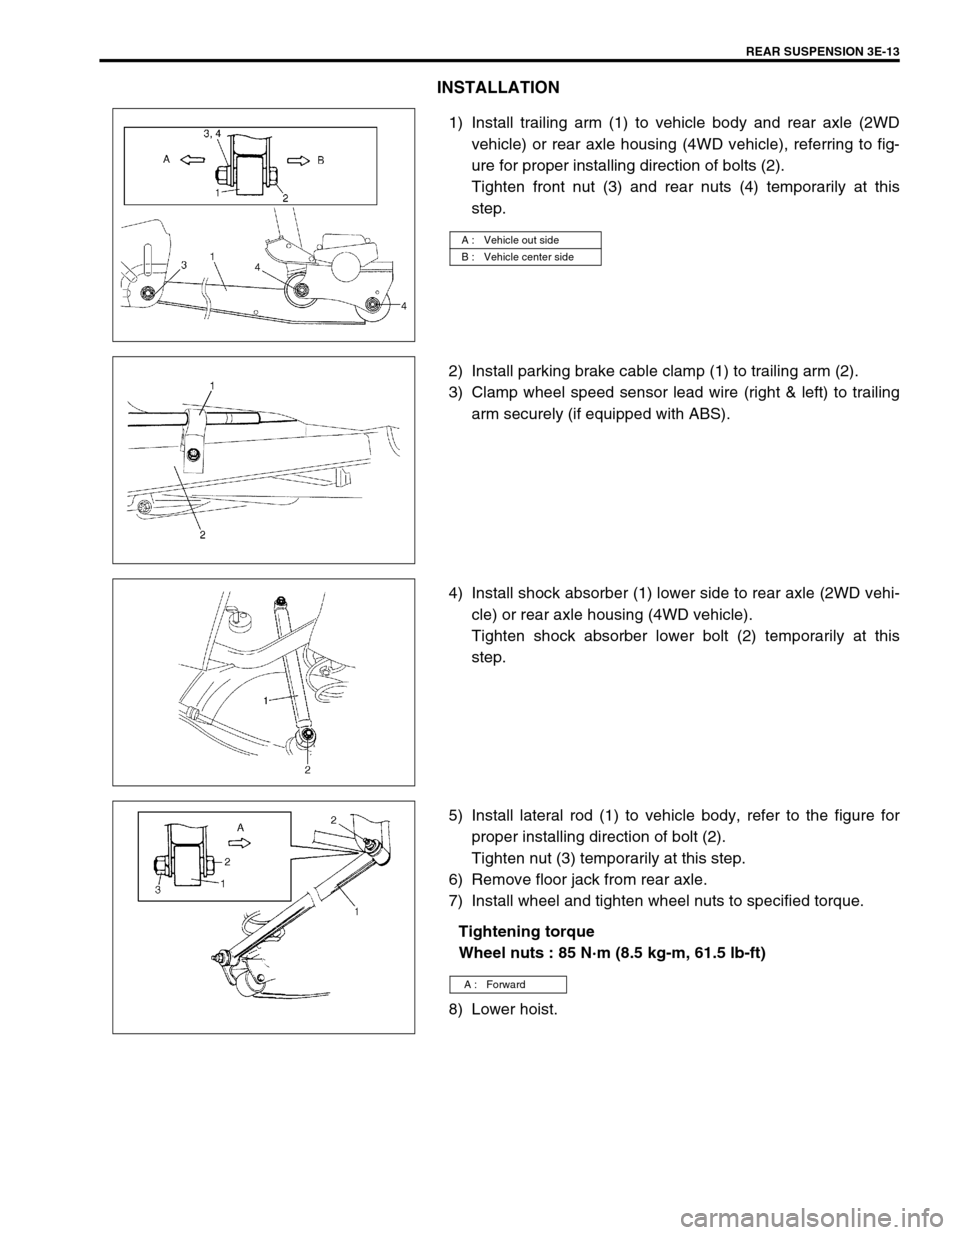 SUZUKI SWIFT 2000 1.G RG413 Service Workshop Manual REAR SUSPENSION 3E-13
INSTALLATION
1) Install trailing arm (1) to vehicle body and rear axle (2WD
vehicle) or rear axle housing (4WD vehicle), referring to fig-
ure for proper installing direction of 